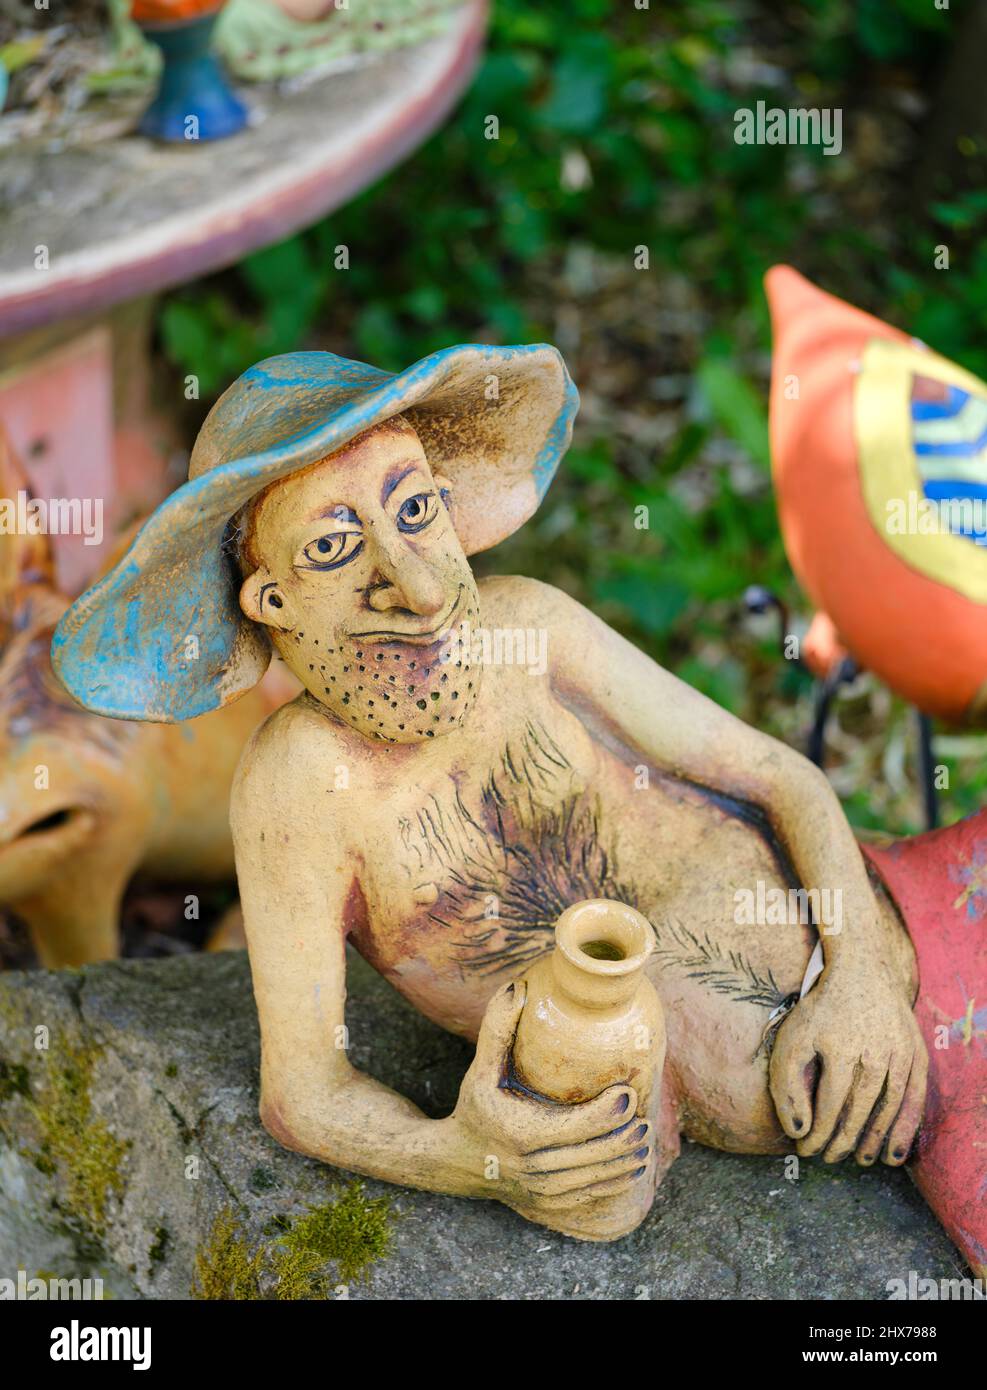 Sculptures made by a local pottery The Paloc village Hollokoe in Hungary, listed as UNESCO world heritage. The traditional farm houses form a complete Stock Photo